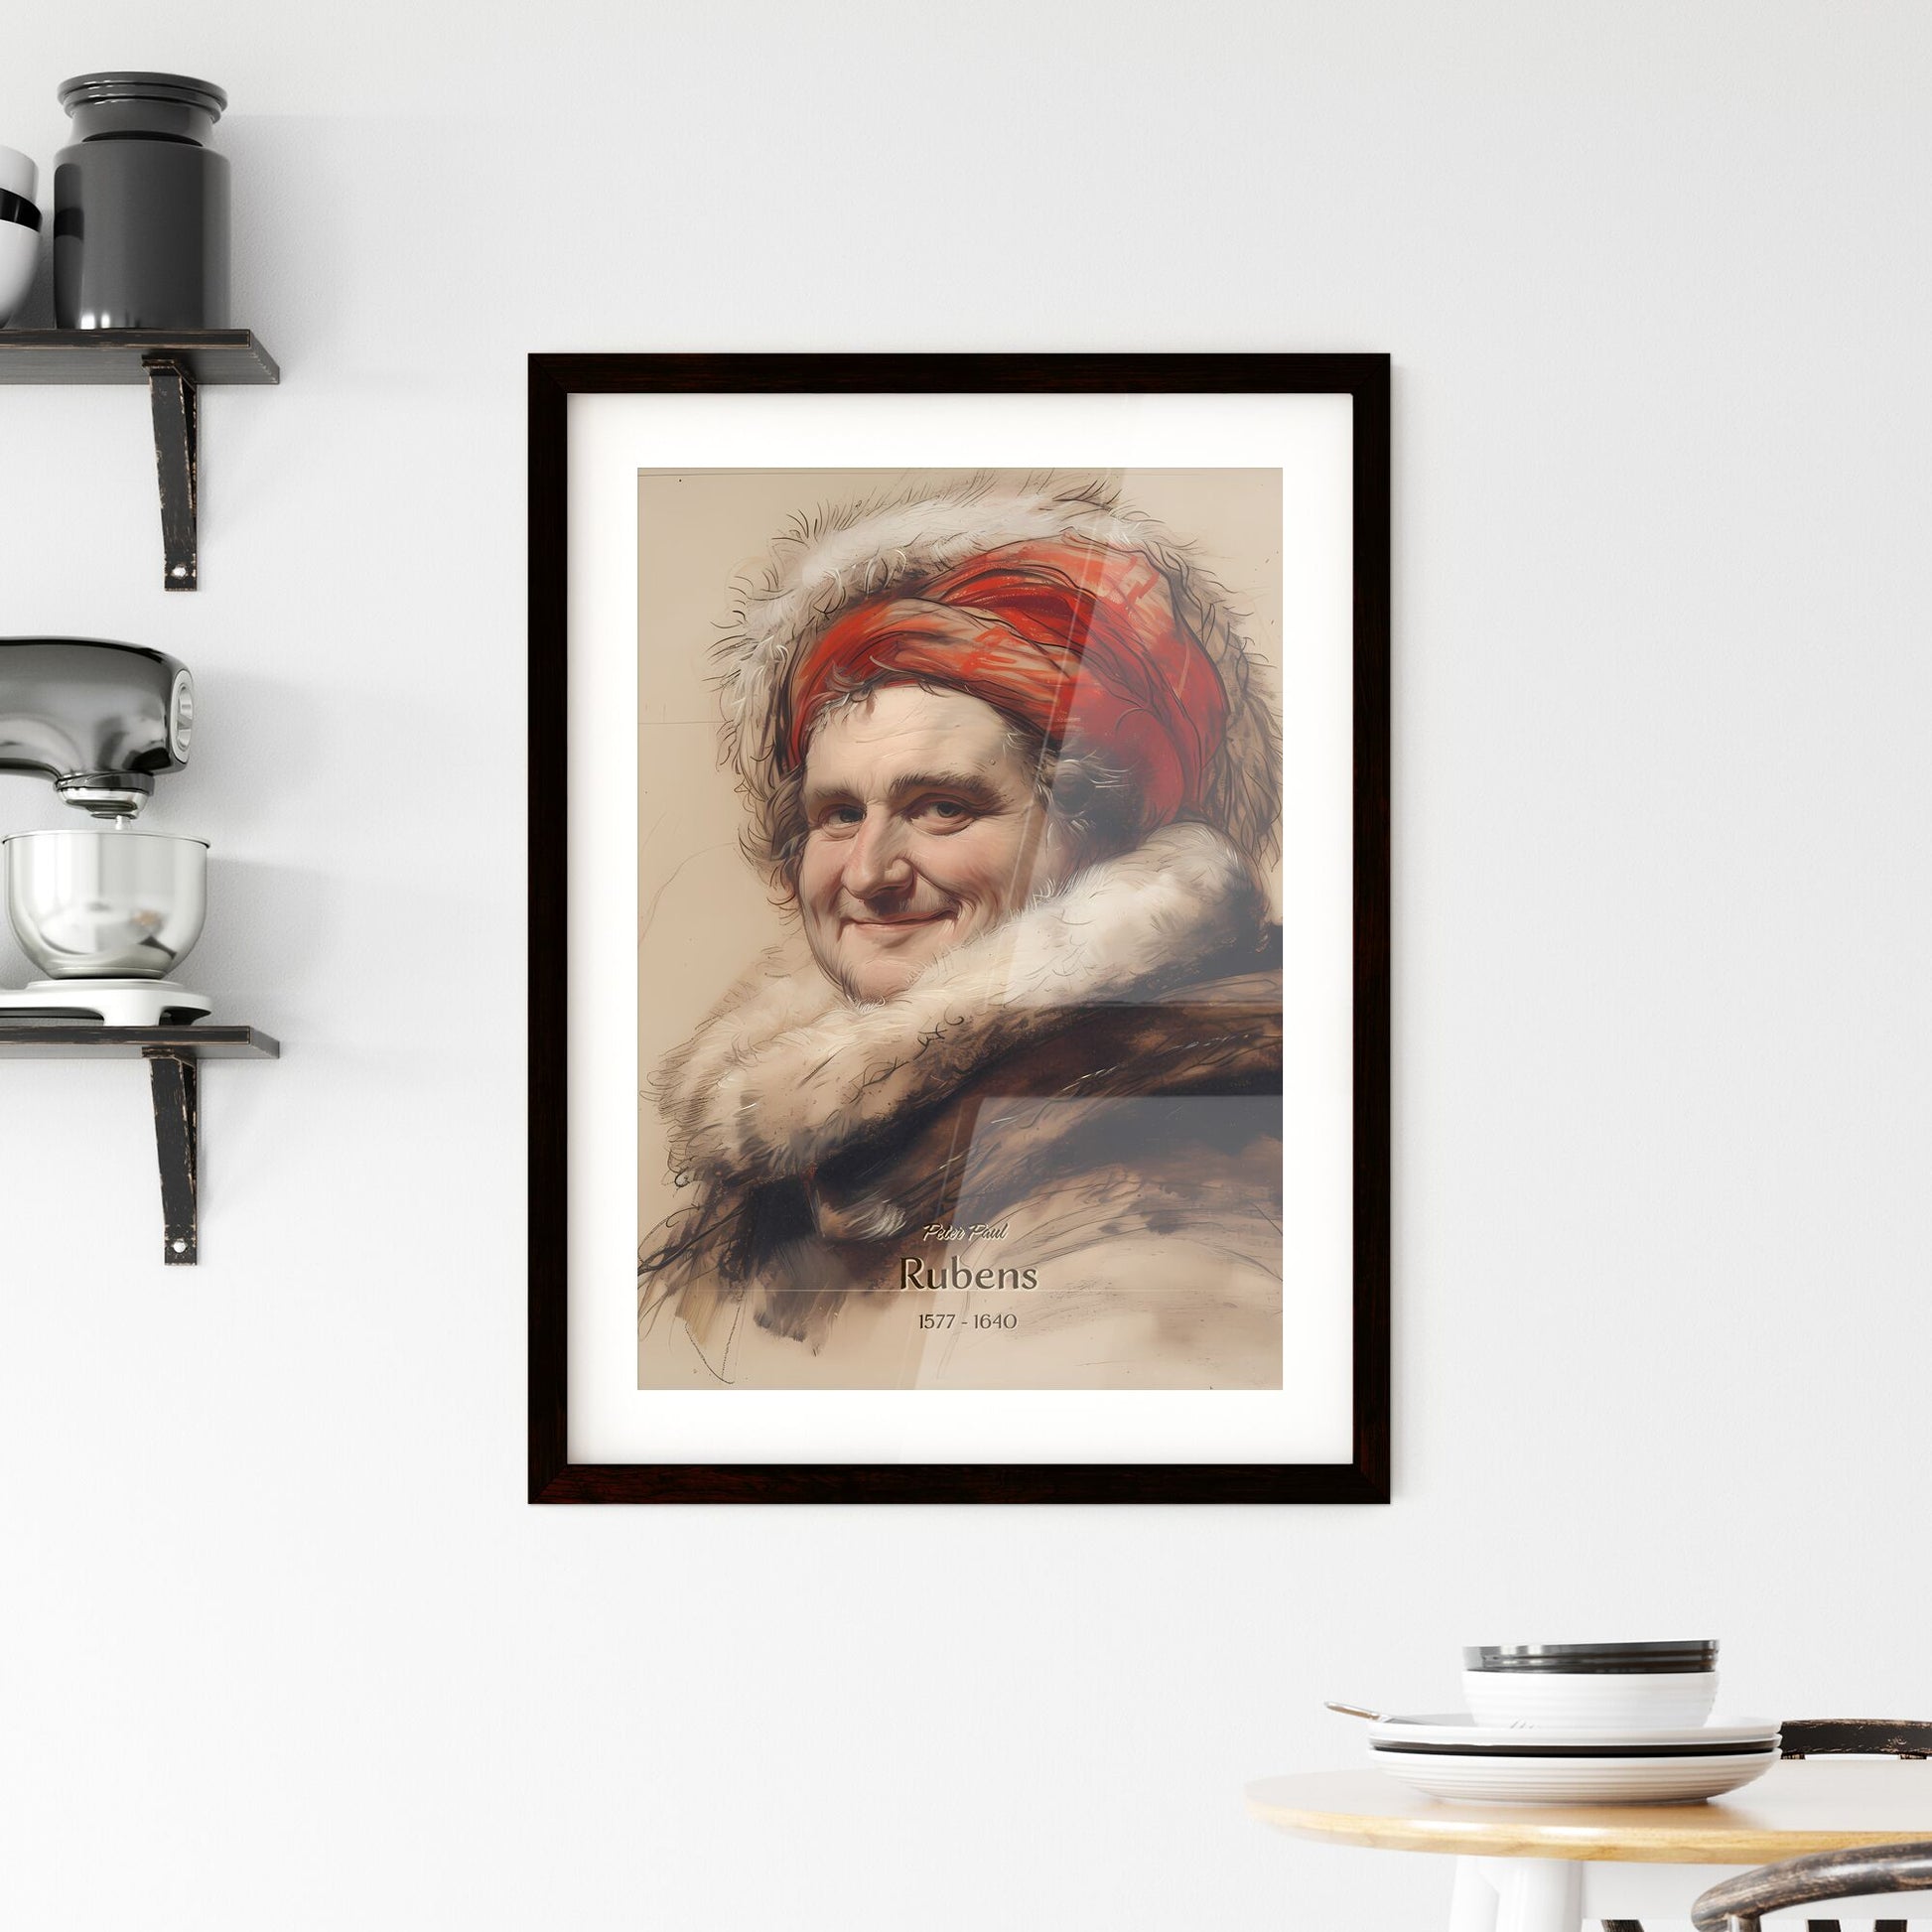 Peter Paul, Rubens, 1577 - 1640, A Poster of a painting of a man wearing a red head scarf and fur coat Default Title